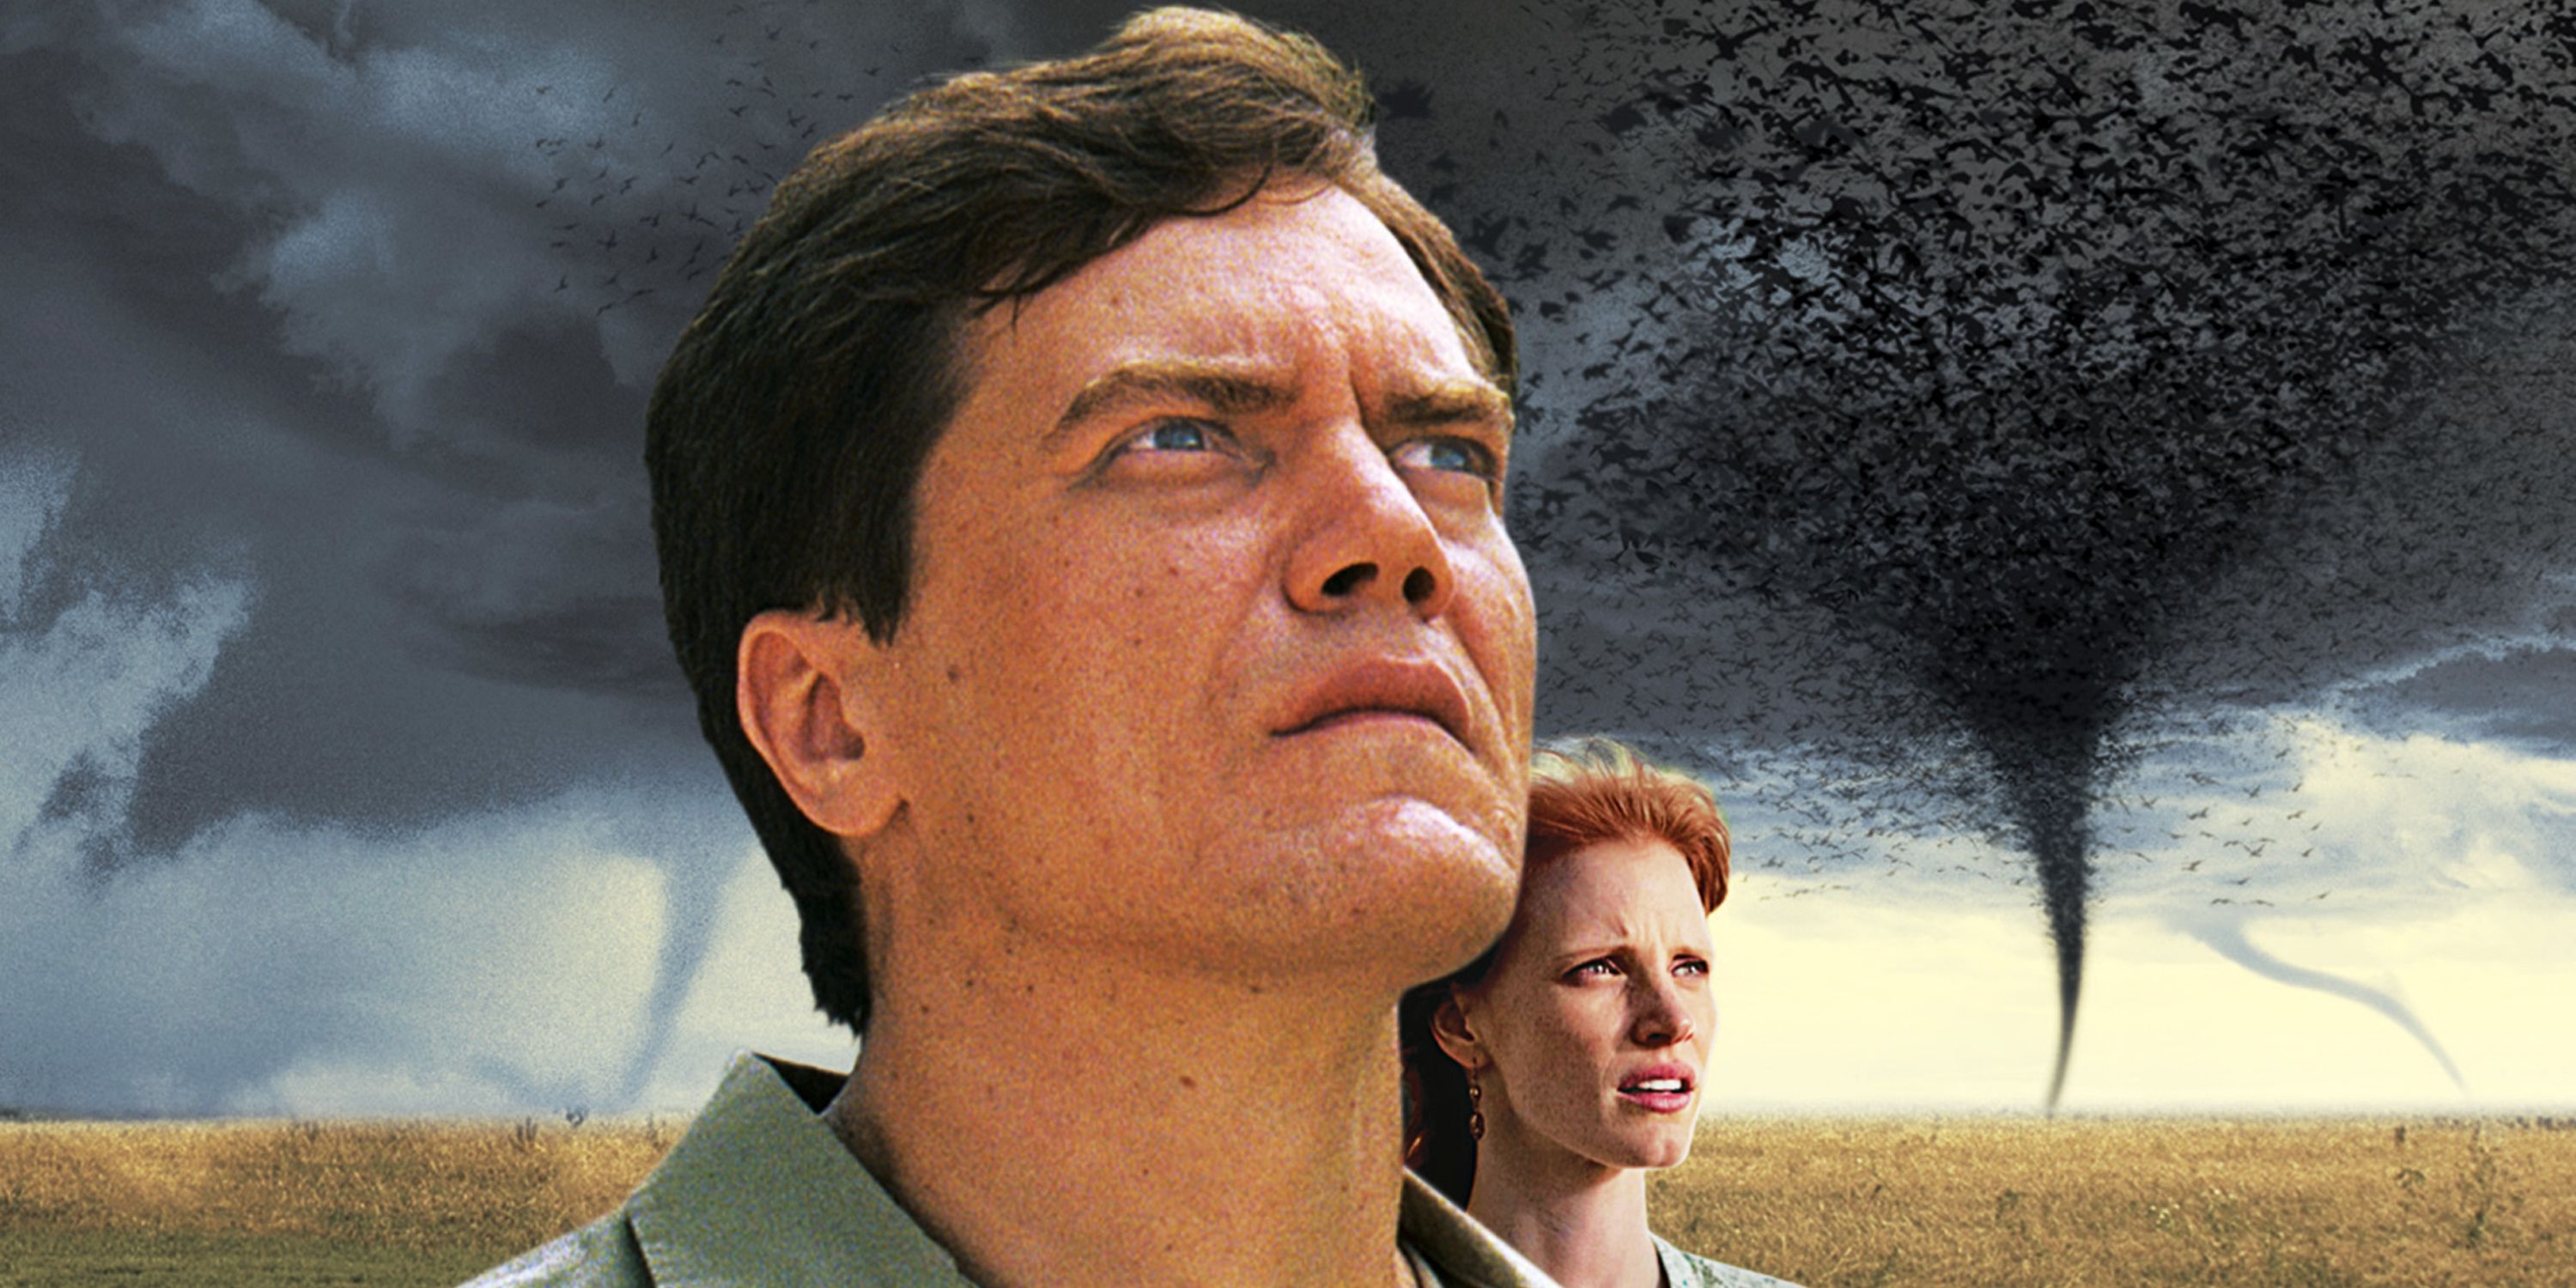 Michael Shannon and Jessica Chastain on the Take Shelter poster